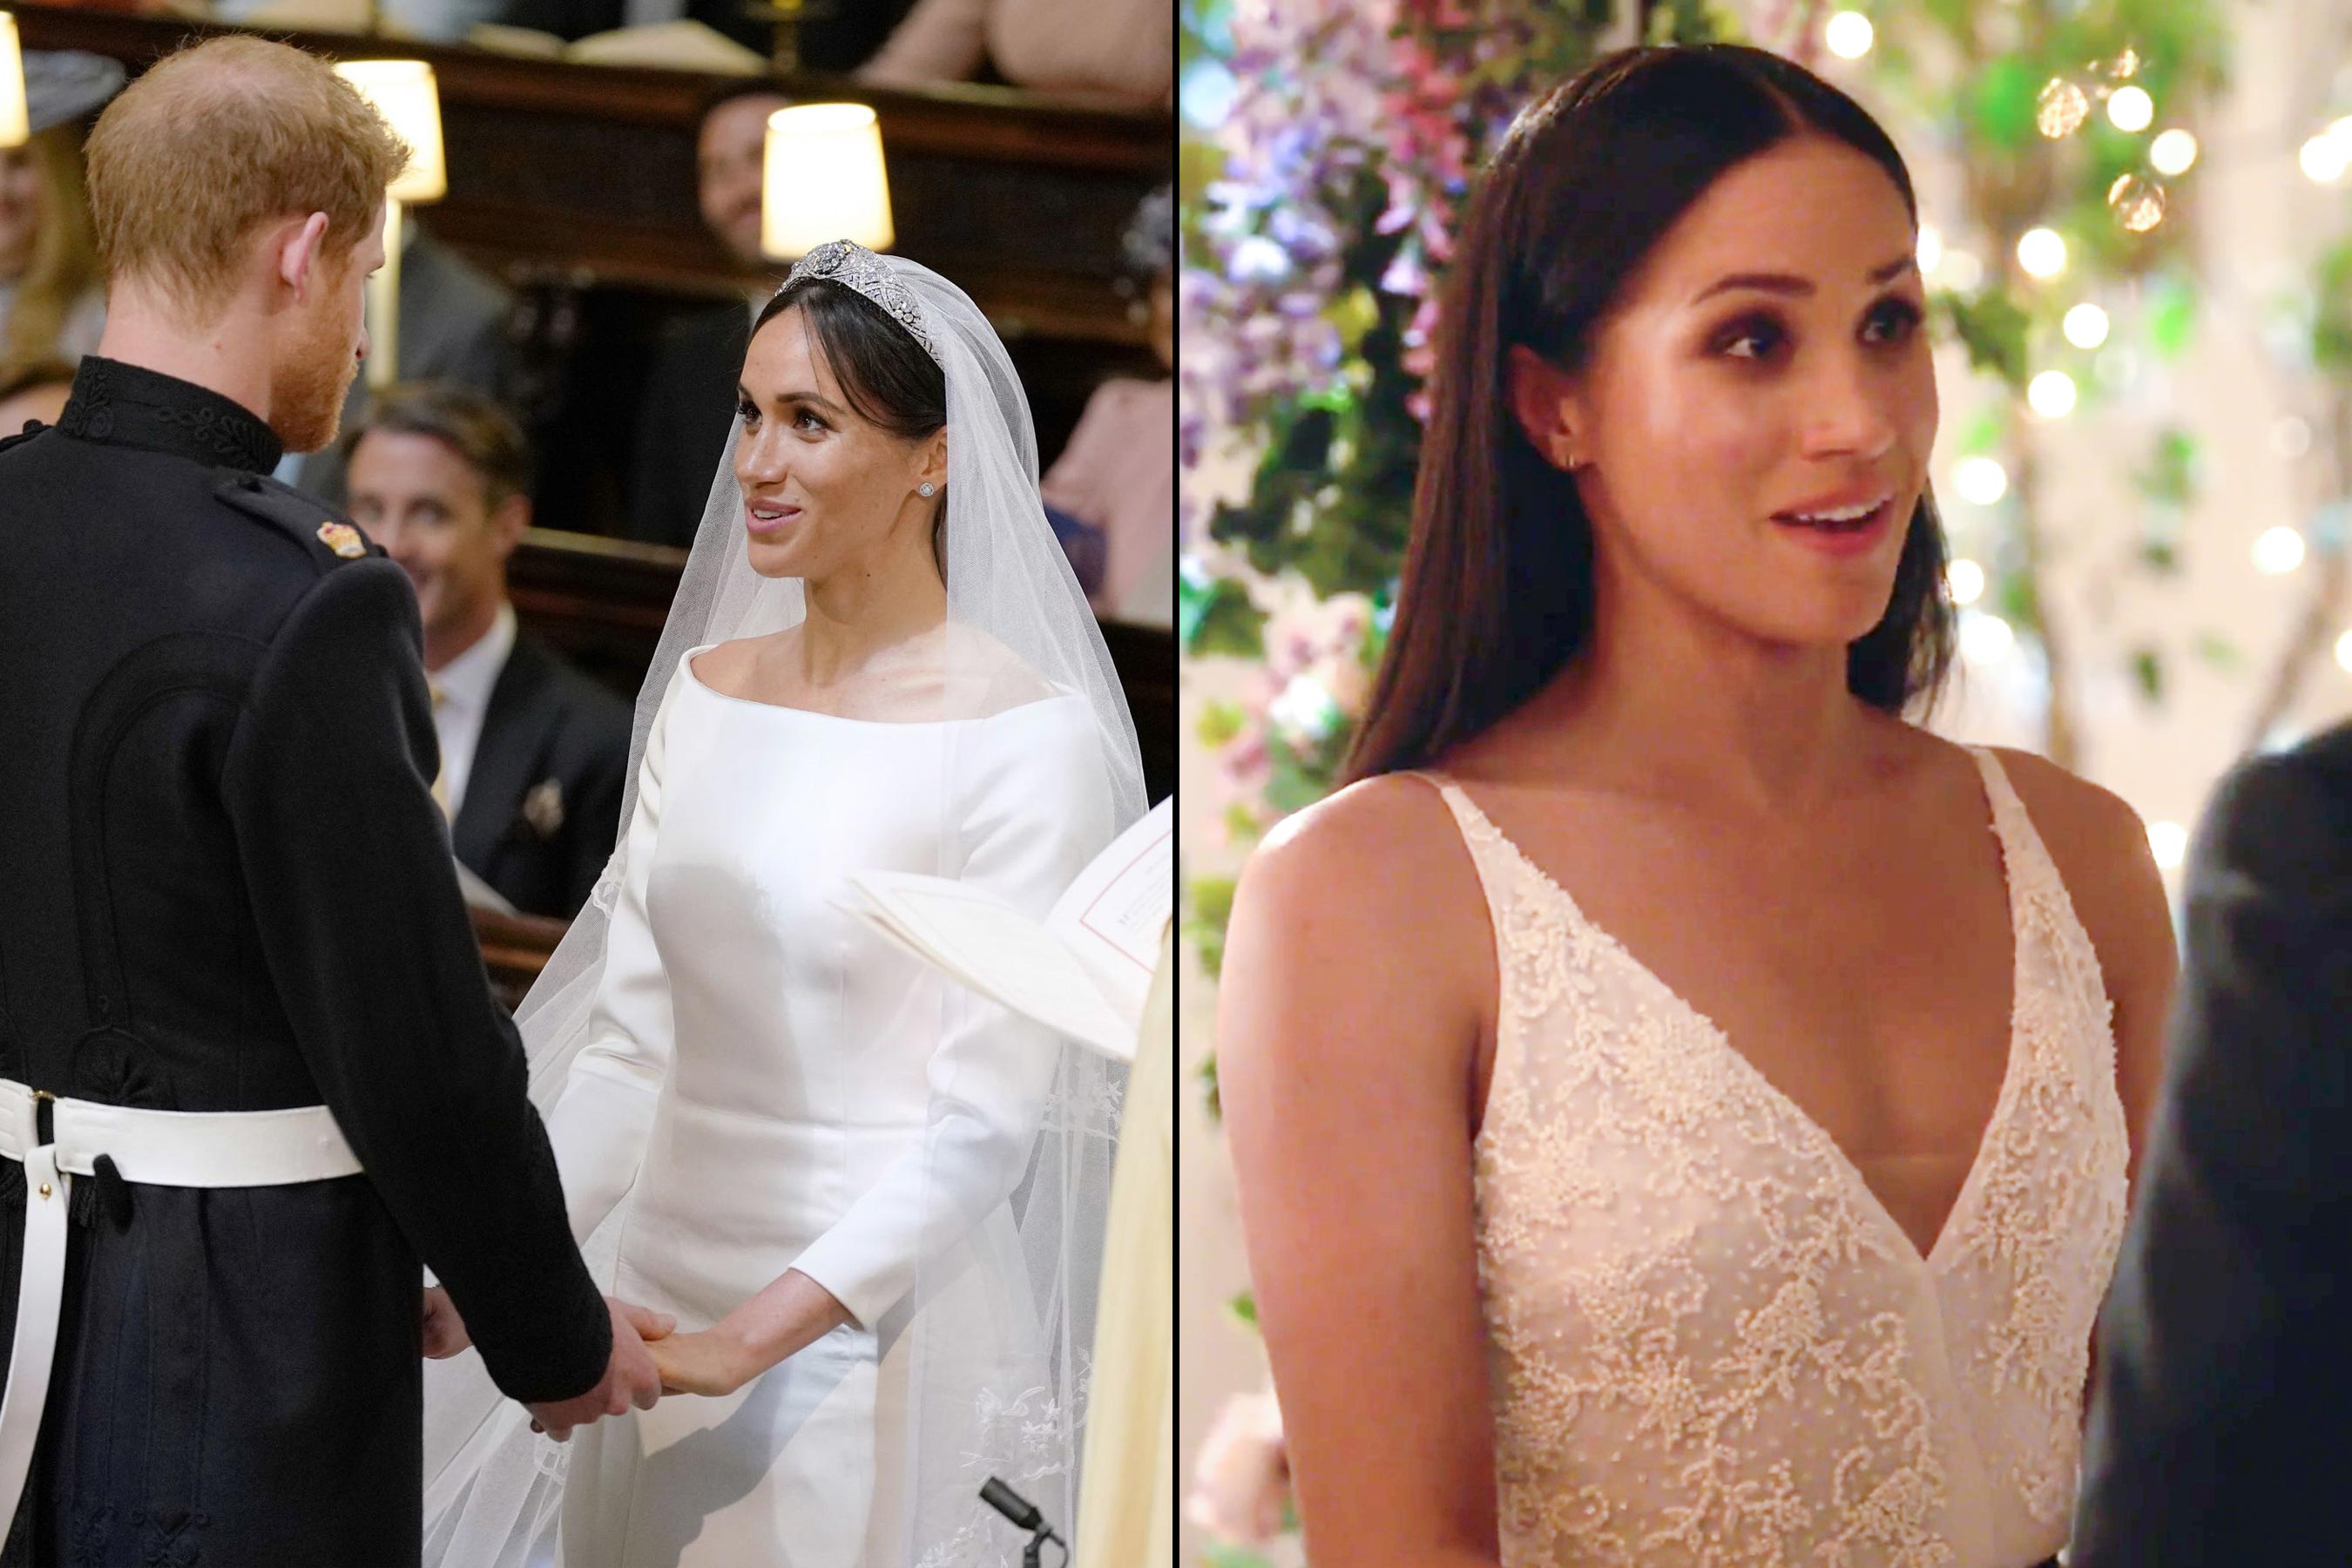 How Meghan Markle's Suits wedding compared to her royal wedding | EW.com